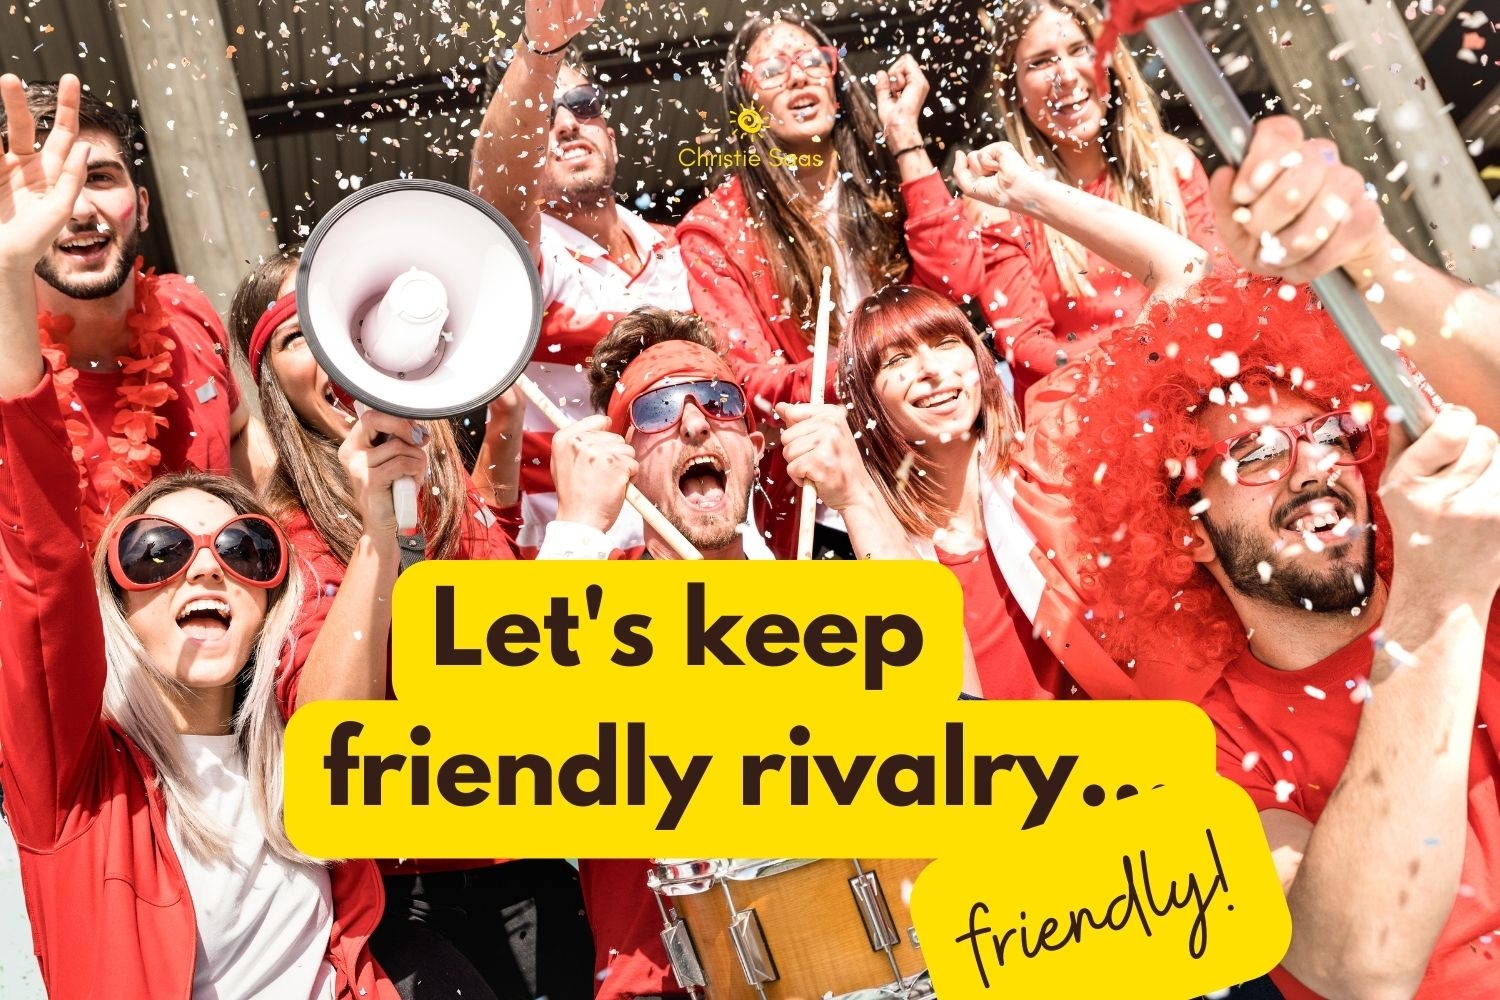 Let's keep friendly rivalry, friendly!